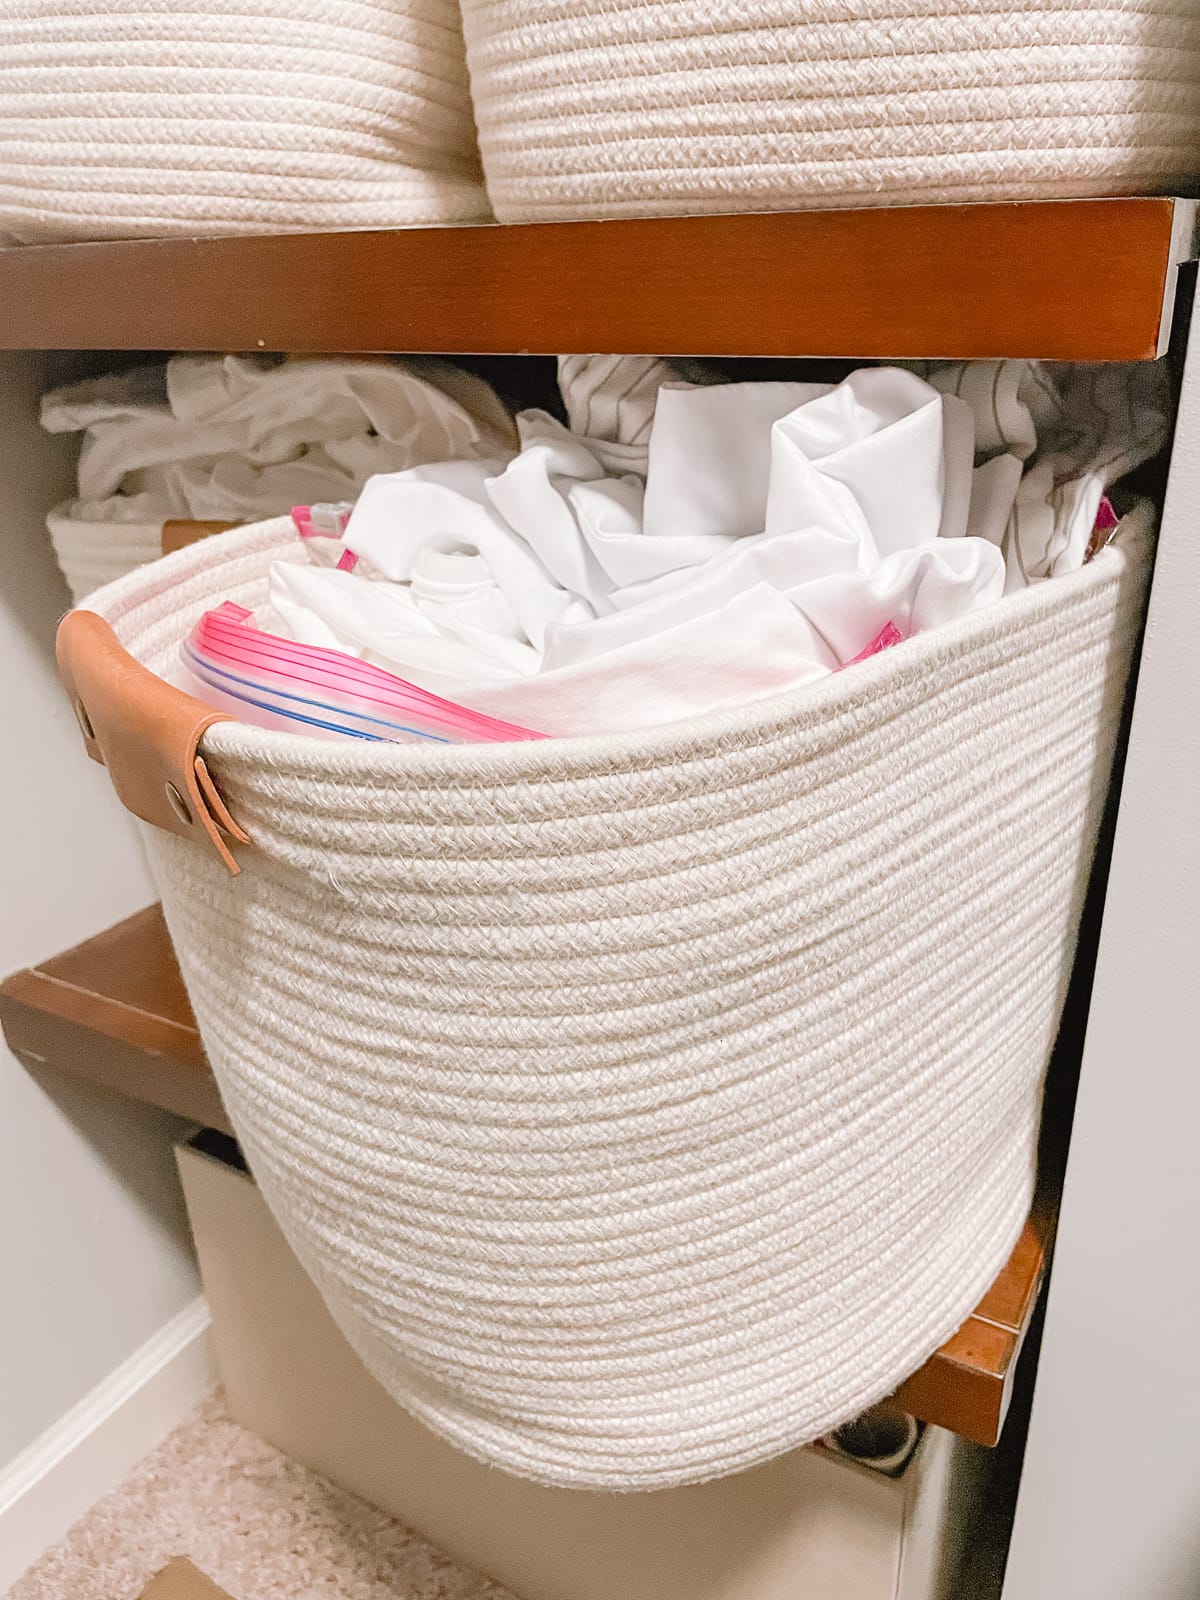 10 Simple Solutions for Organizing Linens Without a Linen Closet